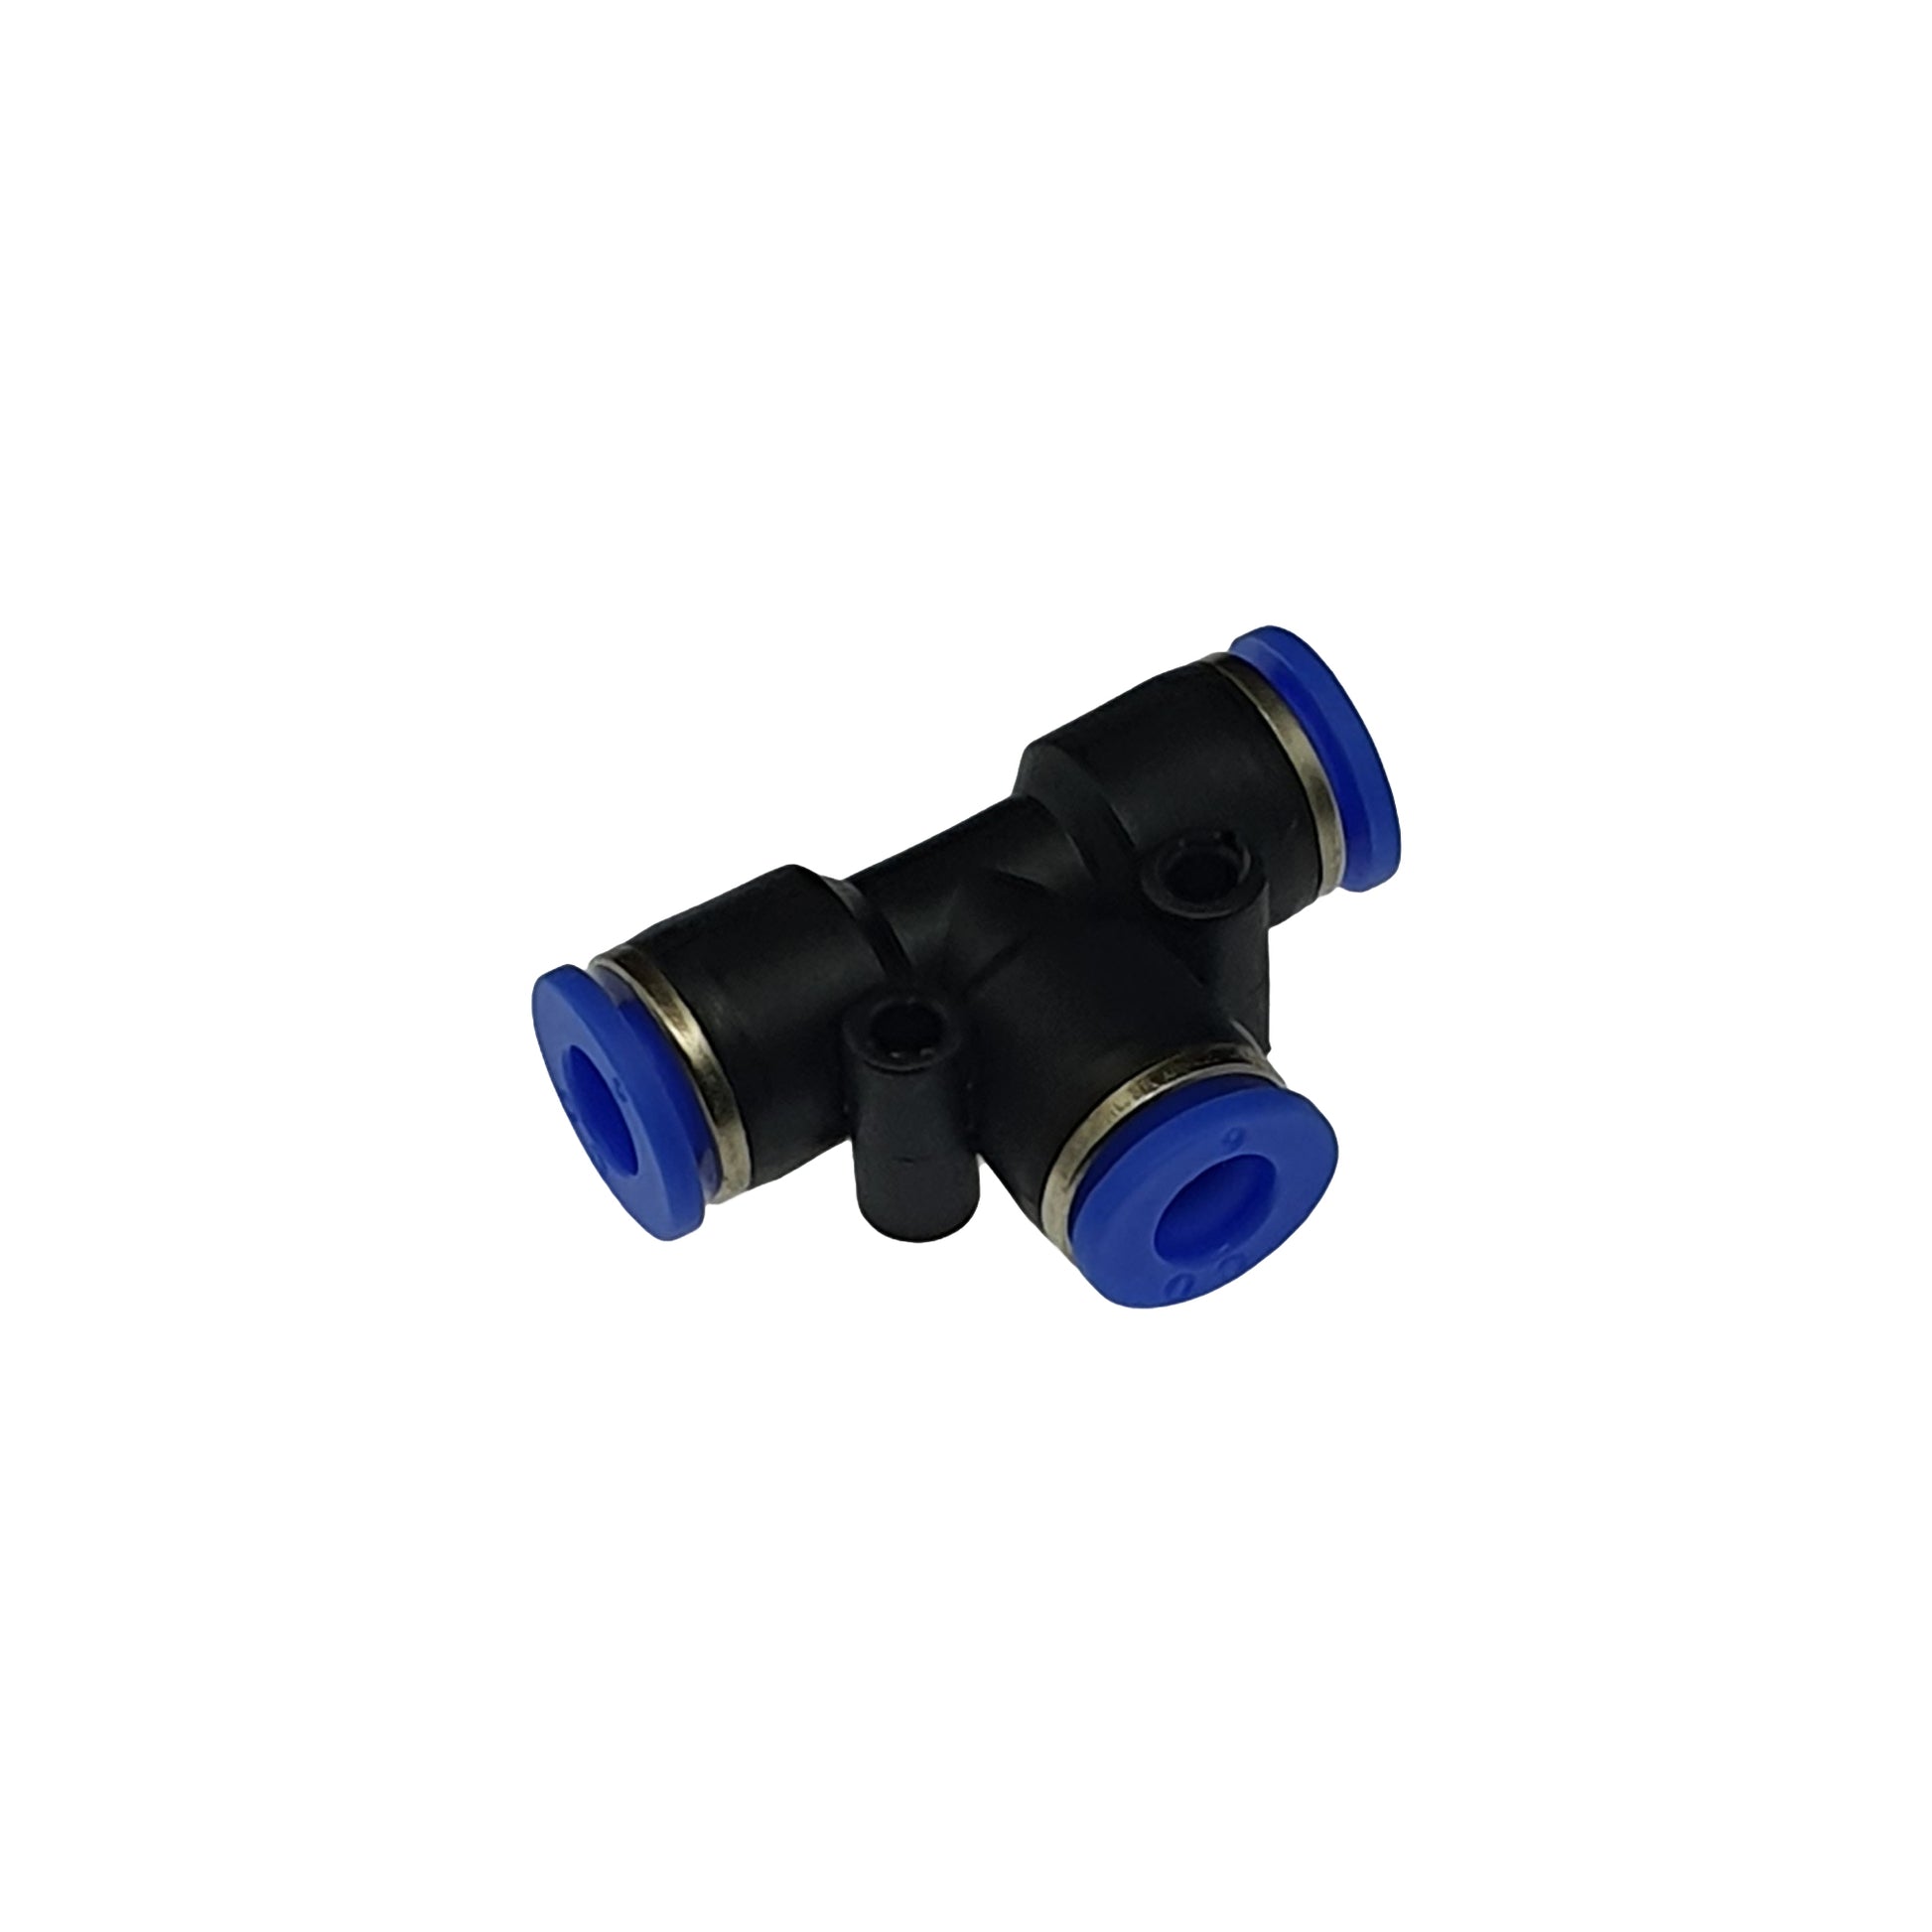 This kit offers a quick disconnect Tee piece suitable for 6mm nylon or PU tubing.